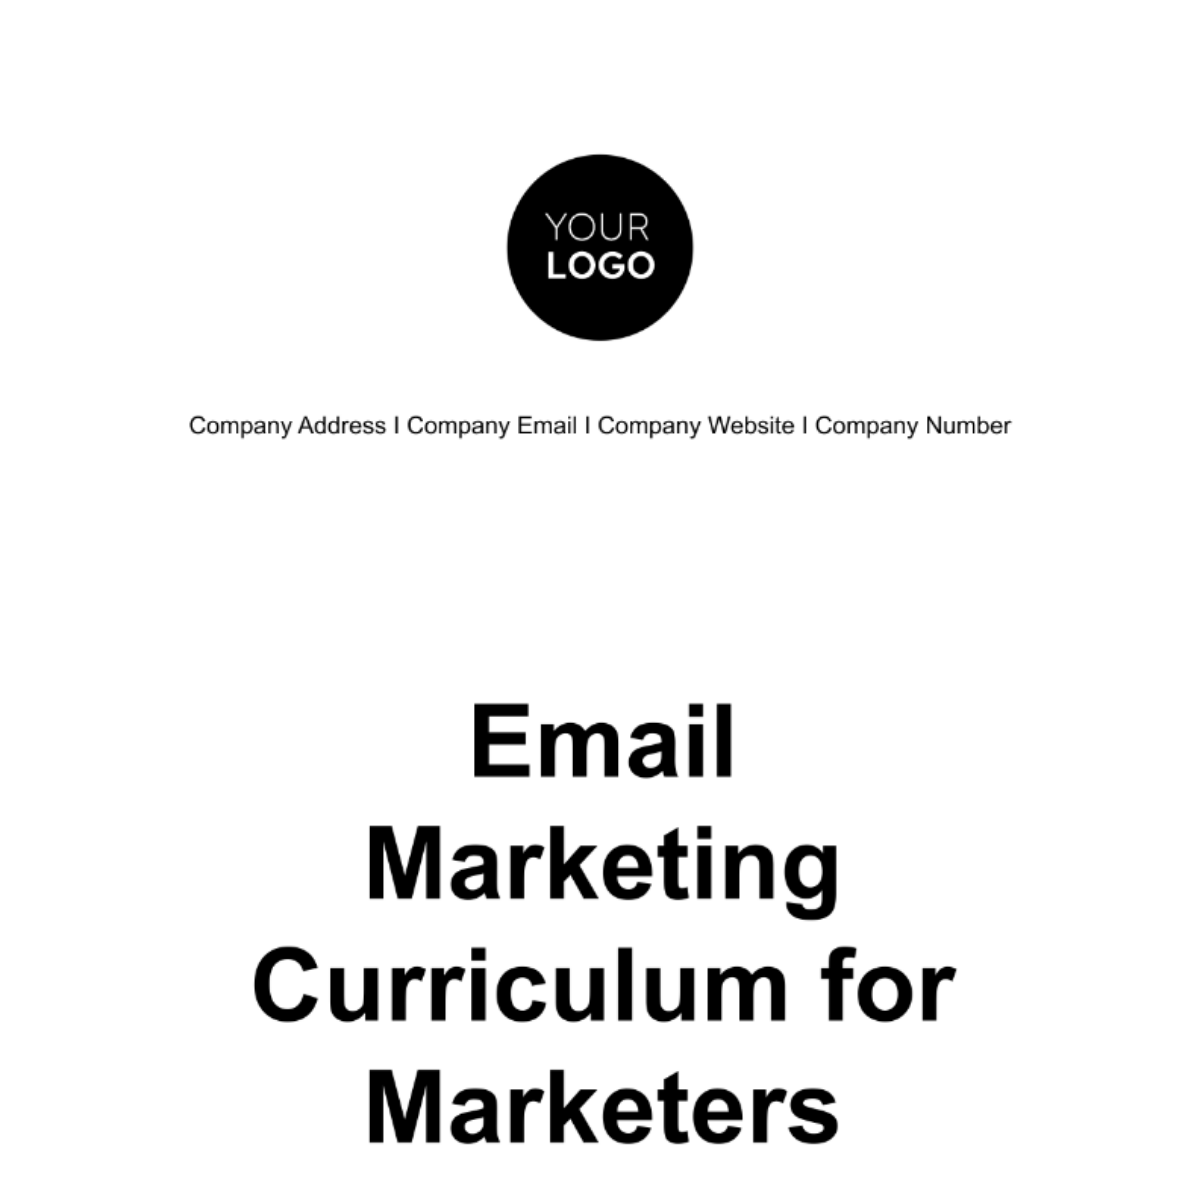 Free Email Marketing Curriculum for Marketers Template